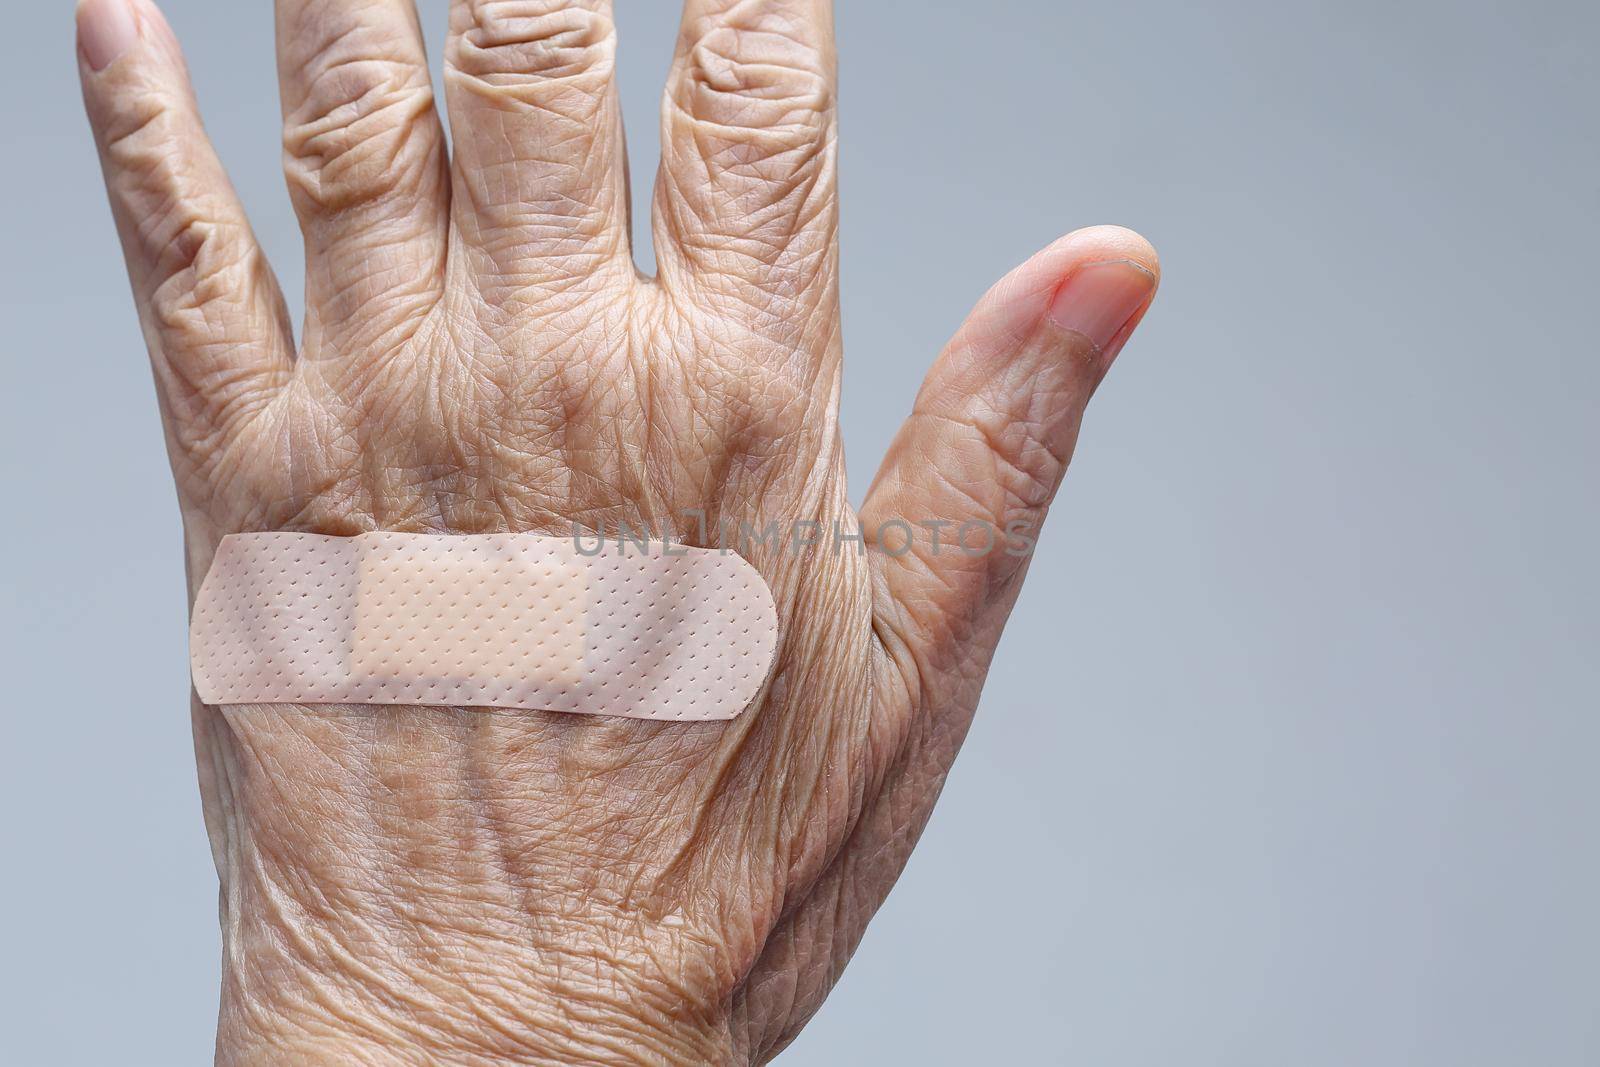 Elderly woman adhesive bandage on her hand by toa55